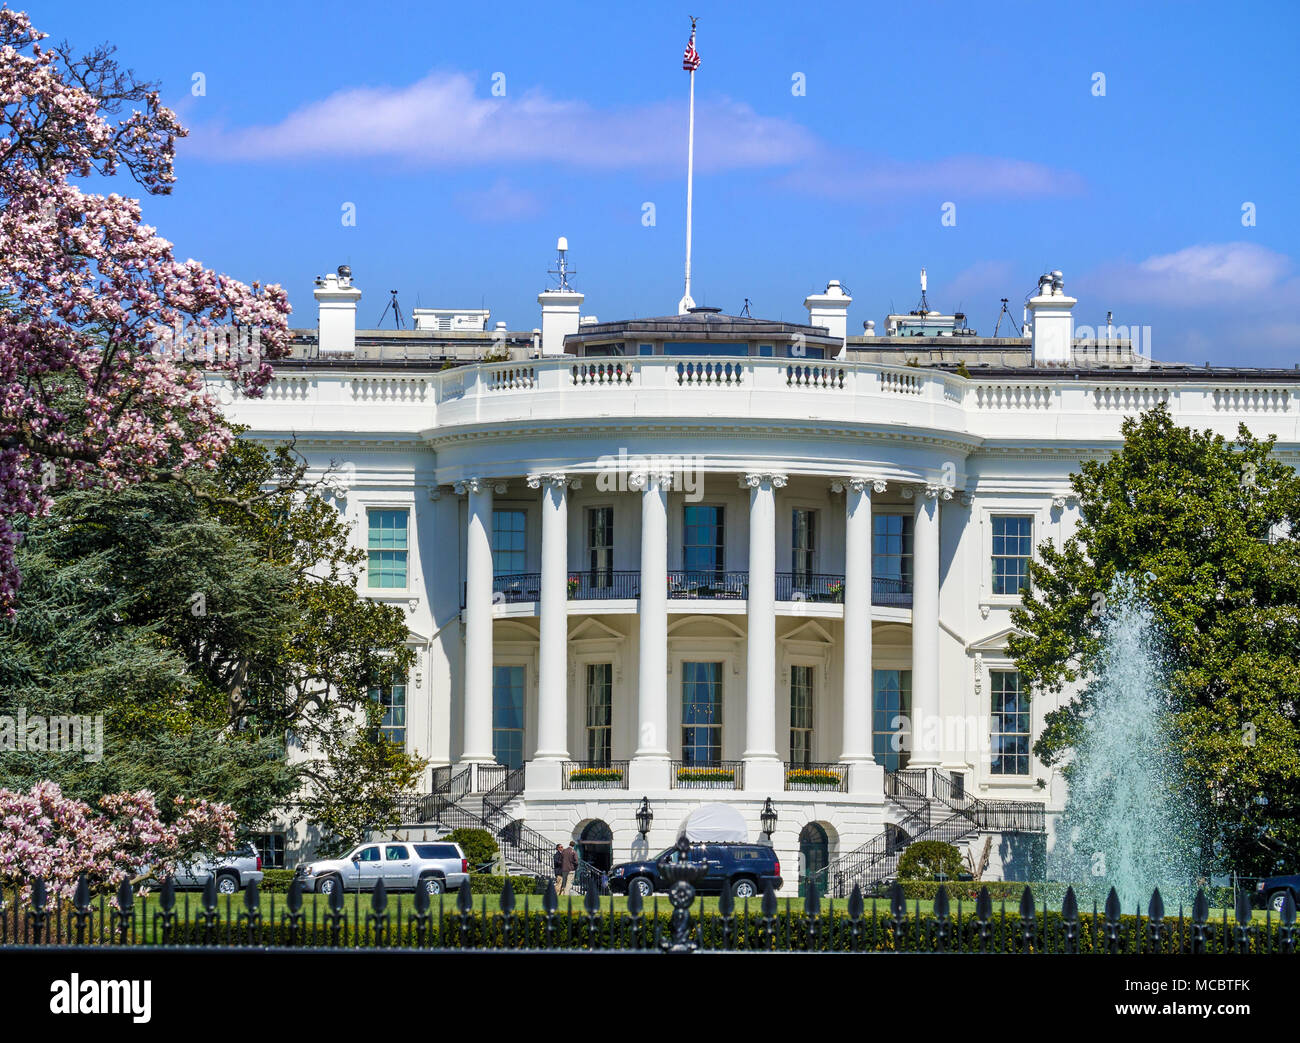 The White House viewed from the South Lawn on a bright day - Washington D.C., USA Stock Photo